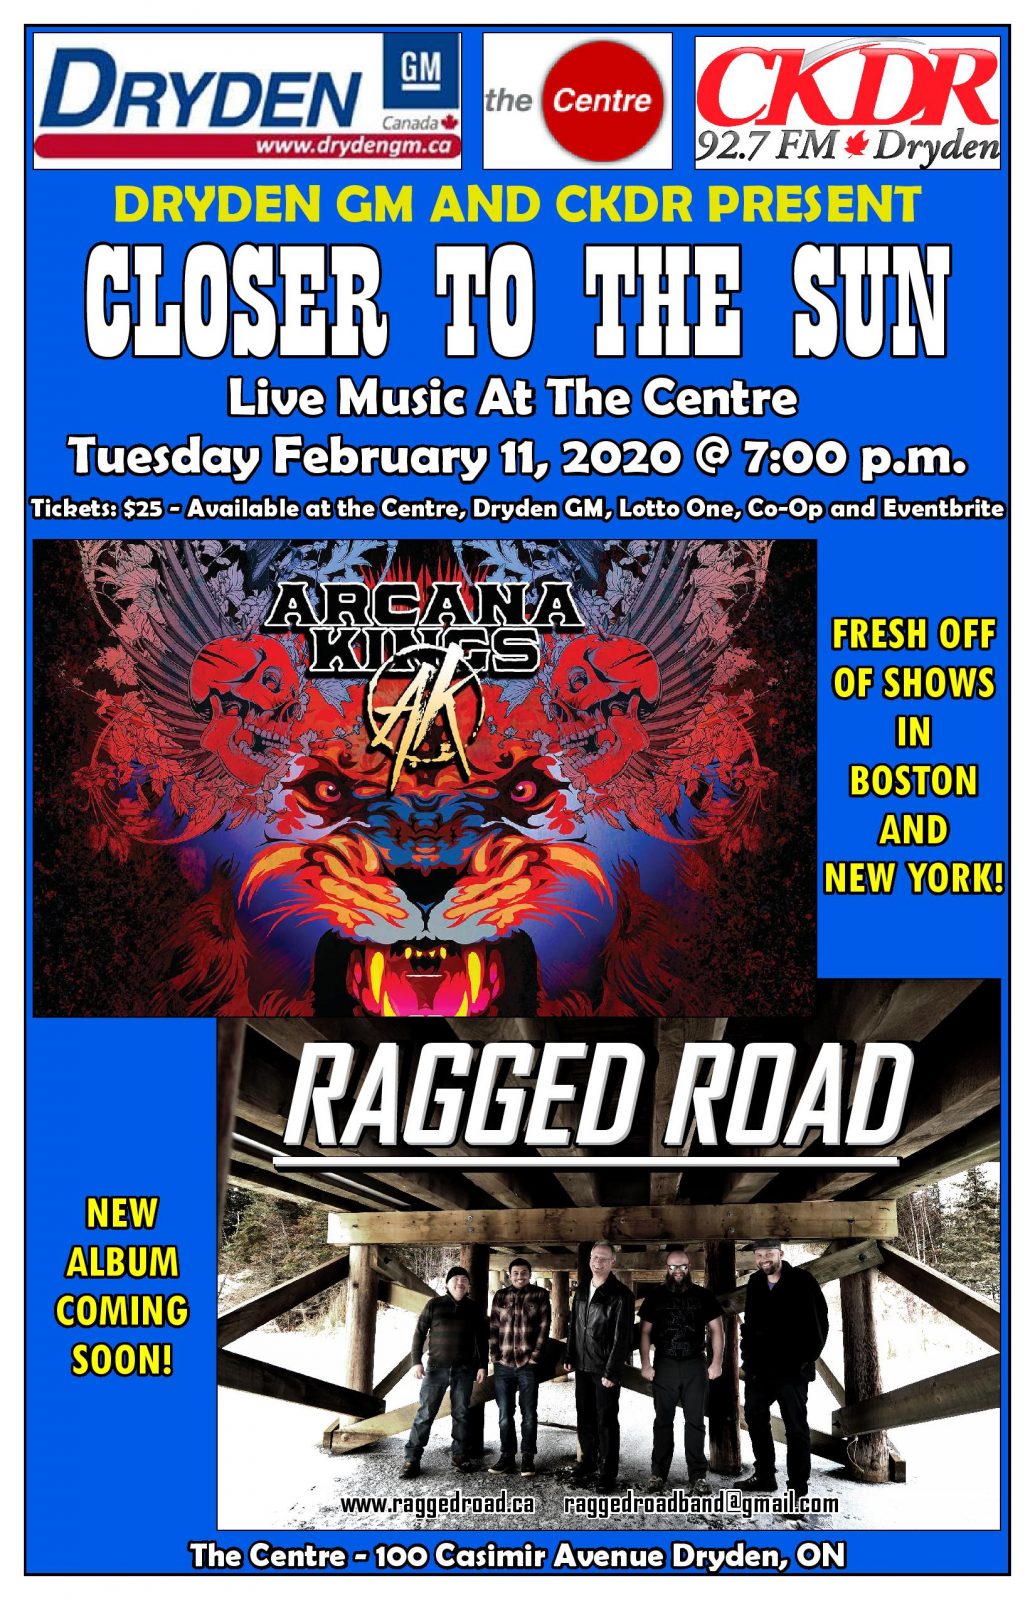 “Closer To The Sun” Concert Coming Soon CKDR